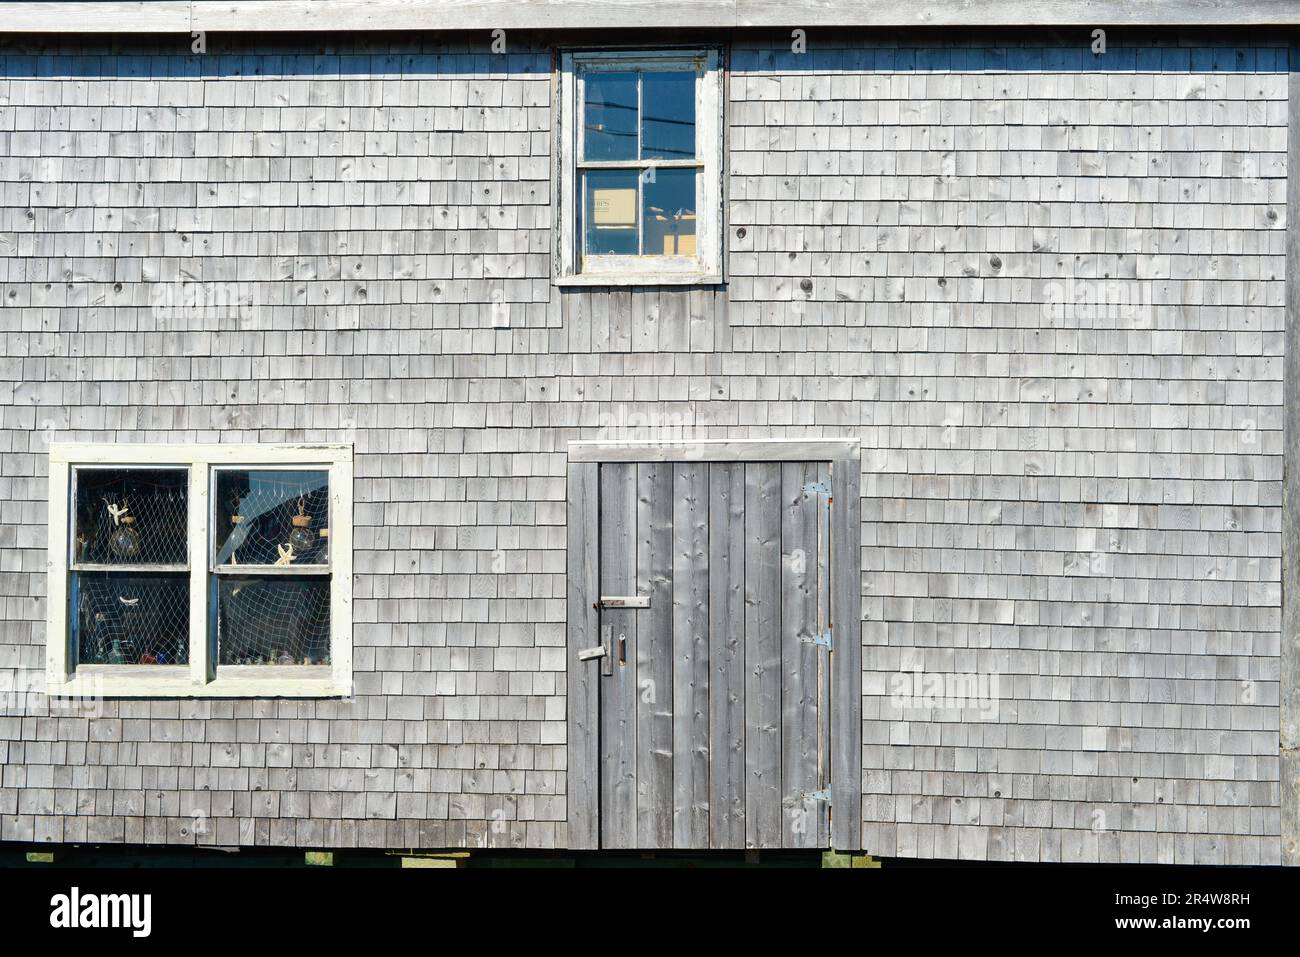 The exterior of a worn grey weathered wooden wall of a shed or barn. There are two windows with four panes of glass and a plank door with a latch. Stock Photo